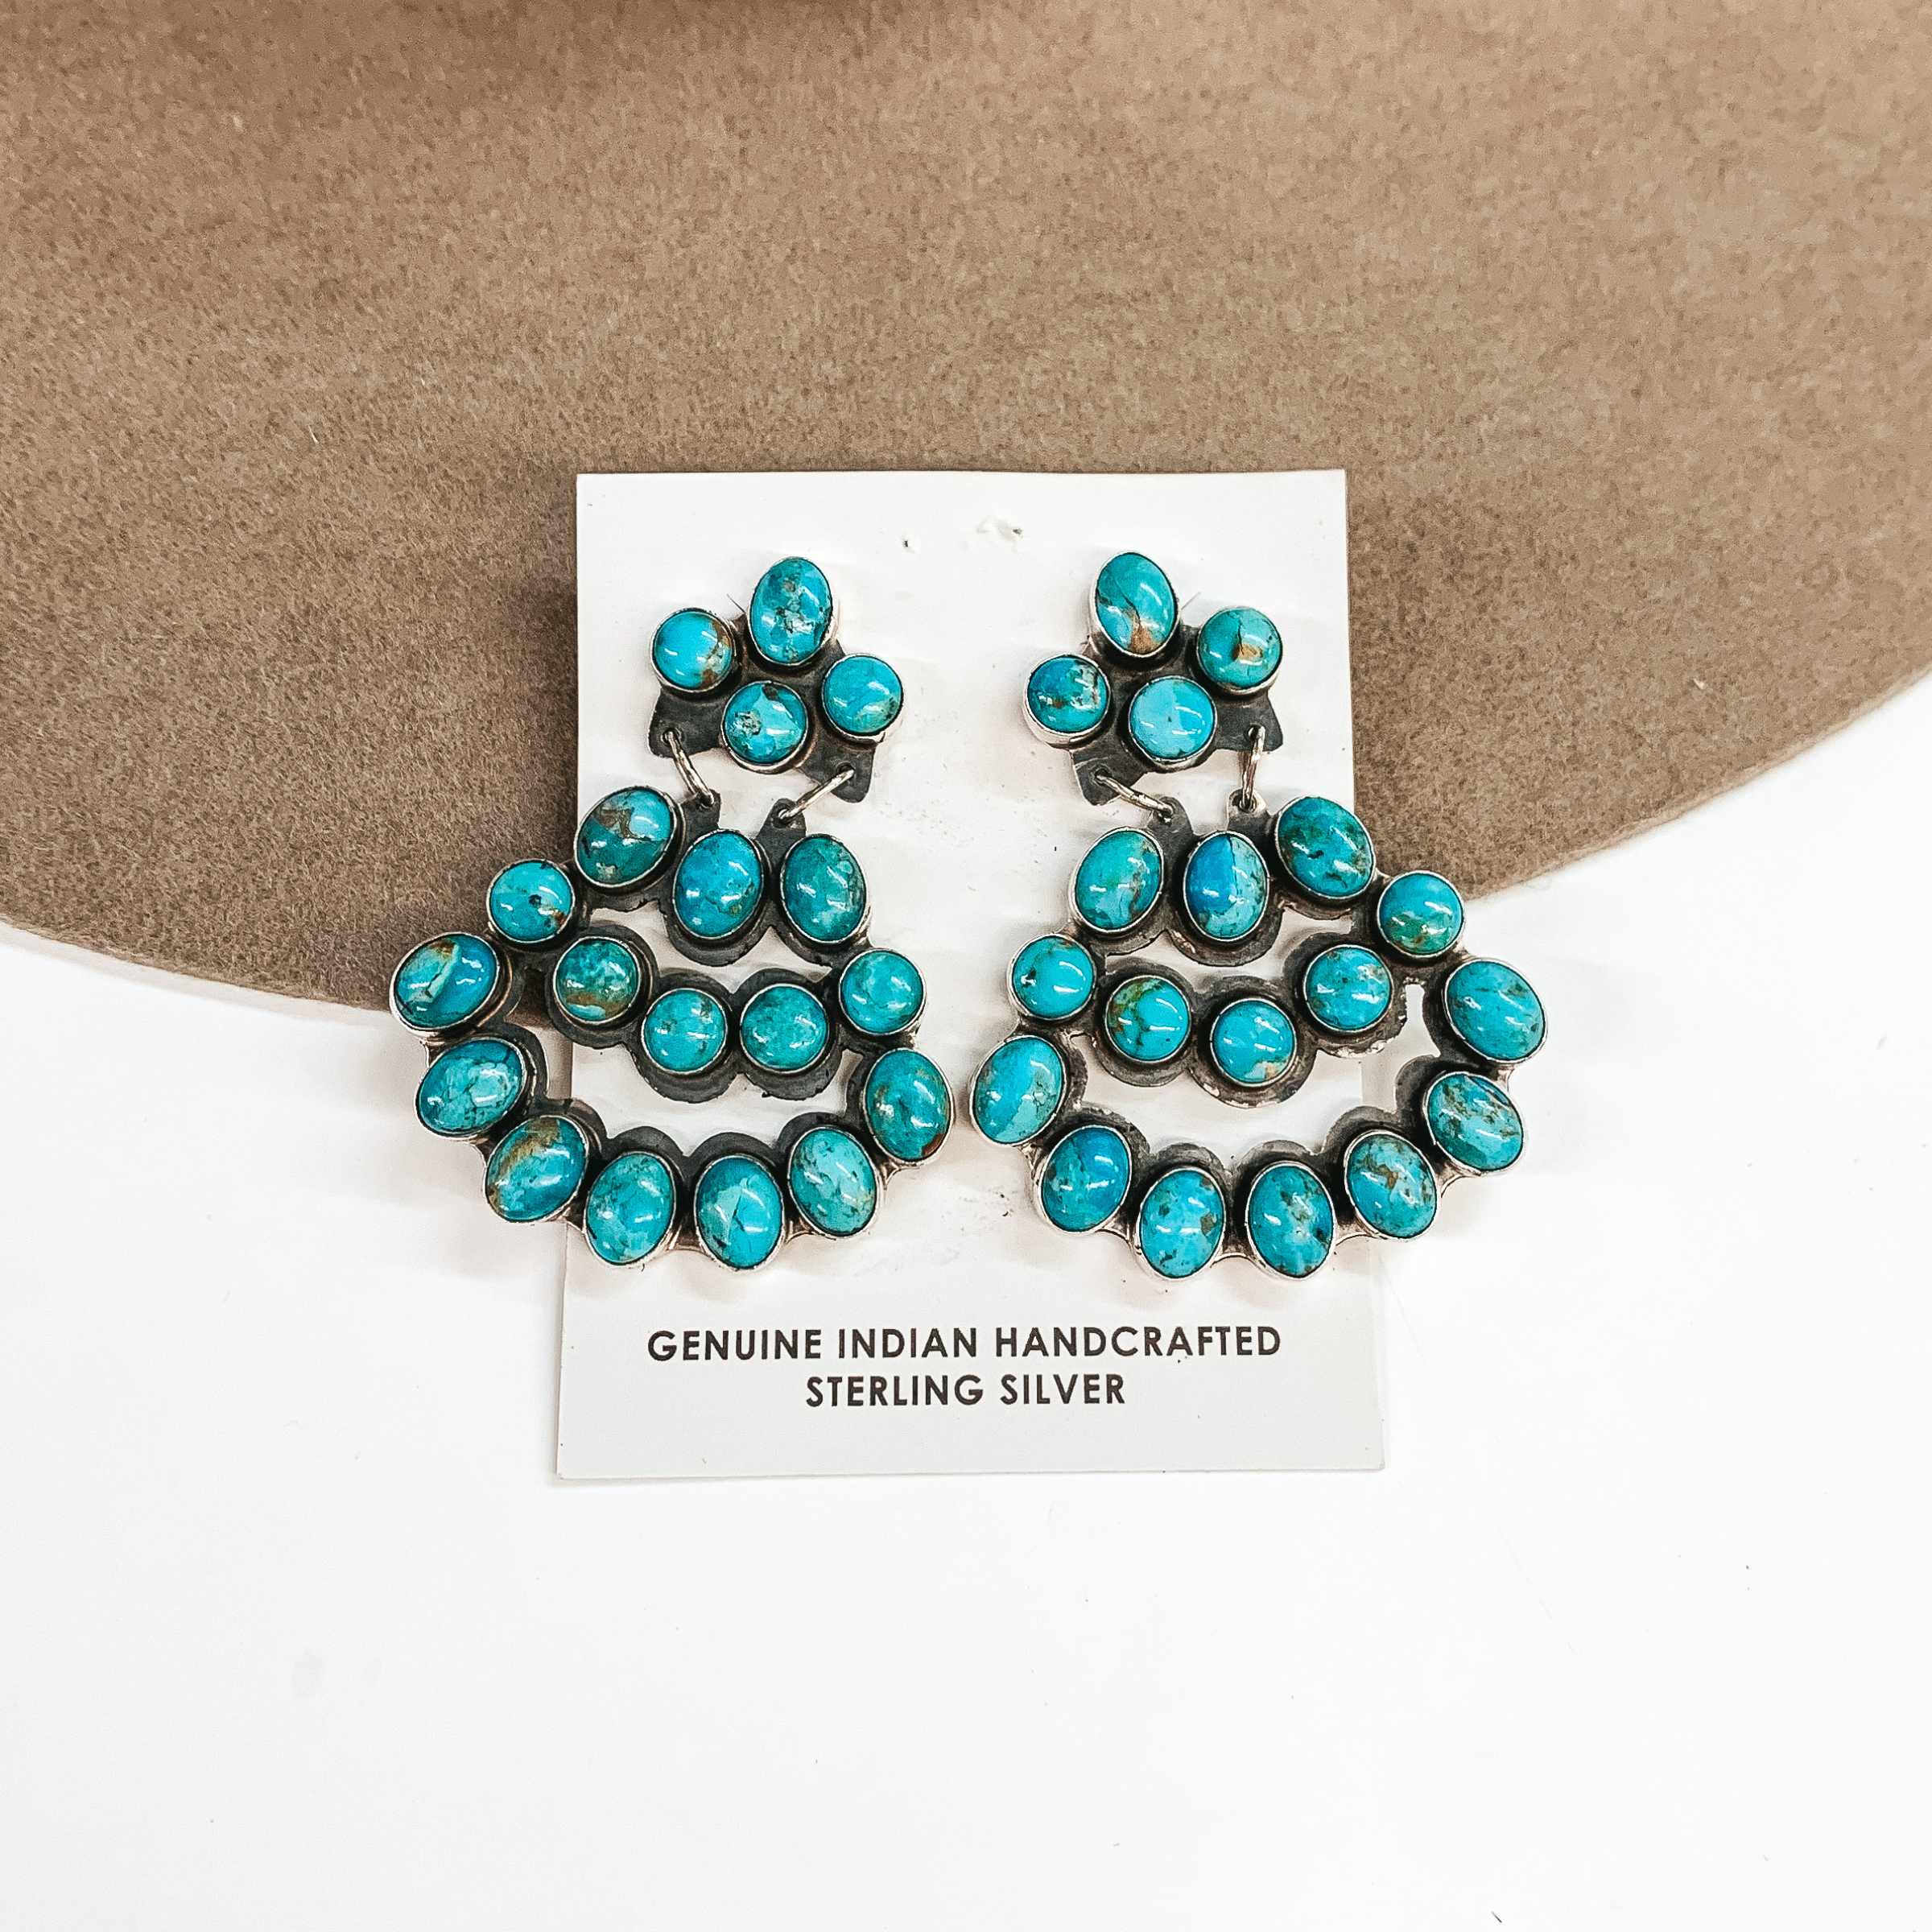 JB | Navajo Handmade Sterling Silver Post Earrings with Tiered Turquoise Stones - Giddy Up Glamour Boutique